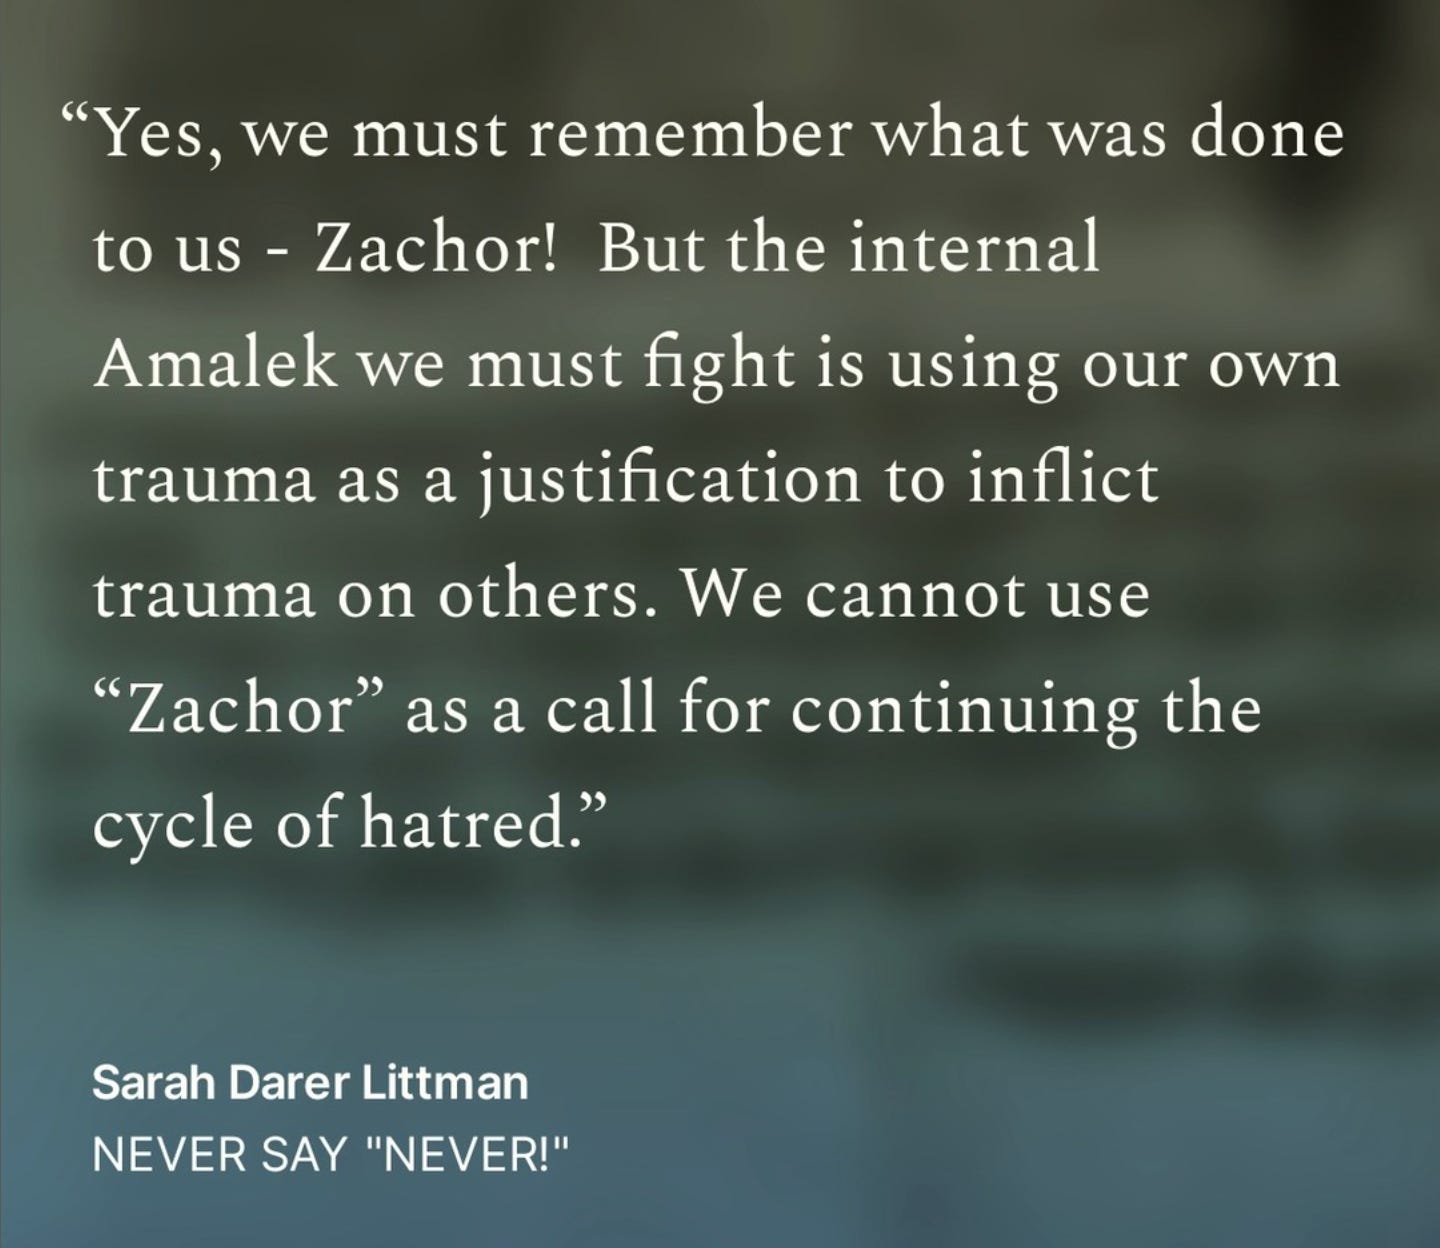 Yes, we must remember what was done to us - Zachor!  But the internal Amalek we must fight is using our own trauma as a justification to inflict trauma on others. We cannot use “Zachor” as a call for continuing the cycle of hatred.